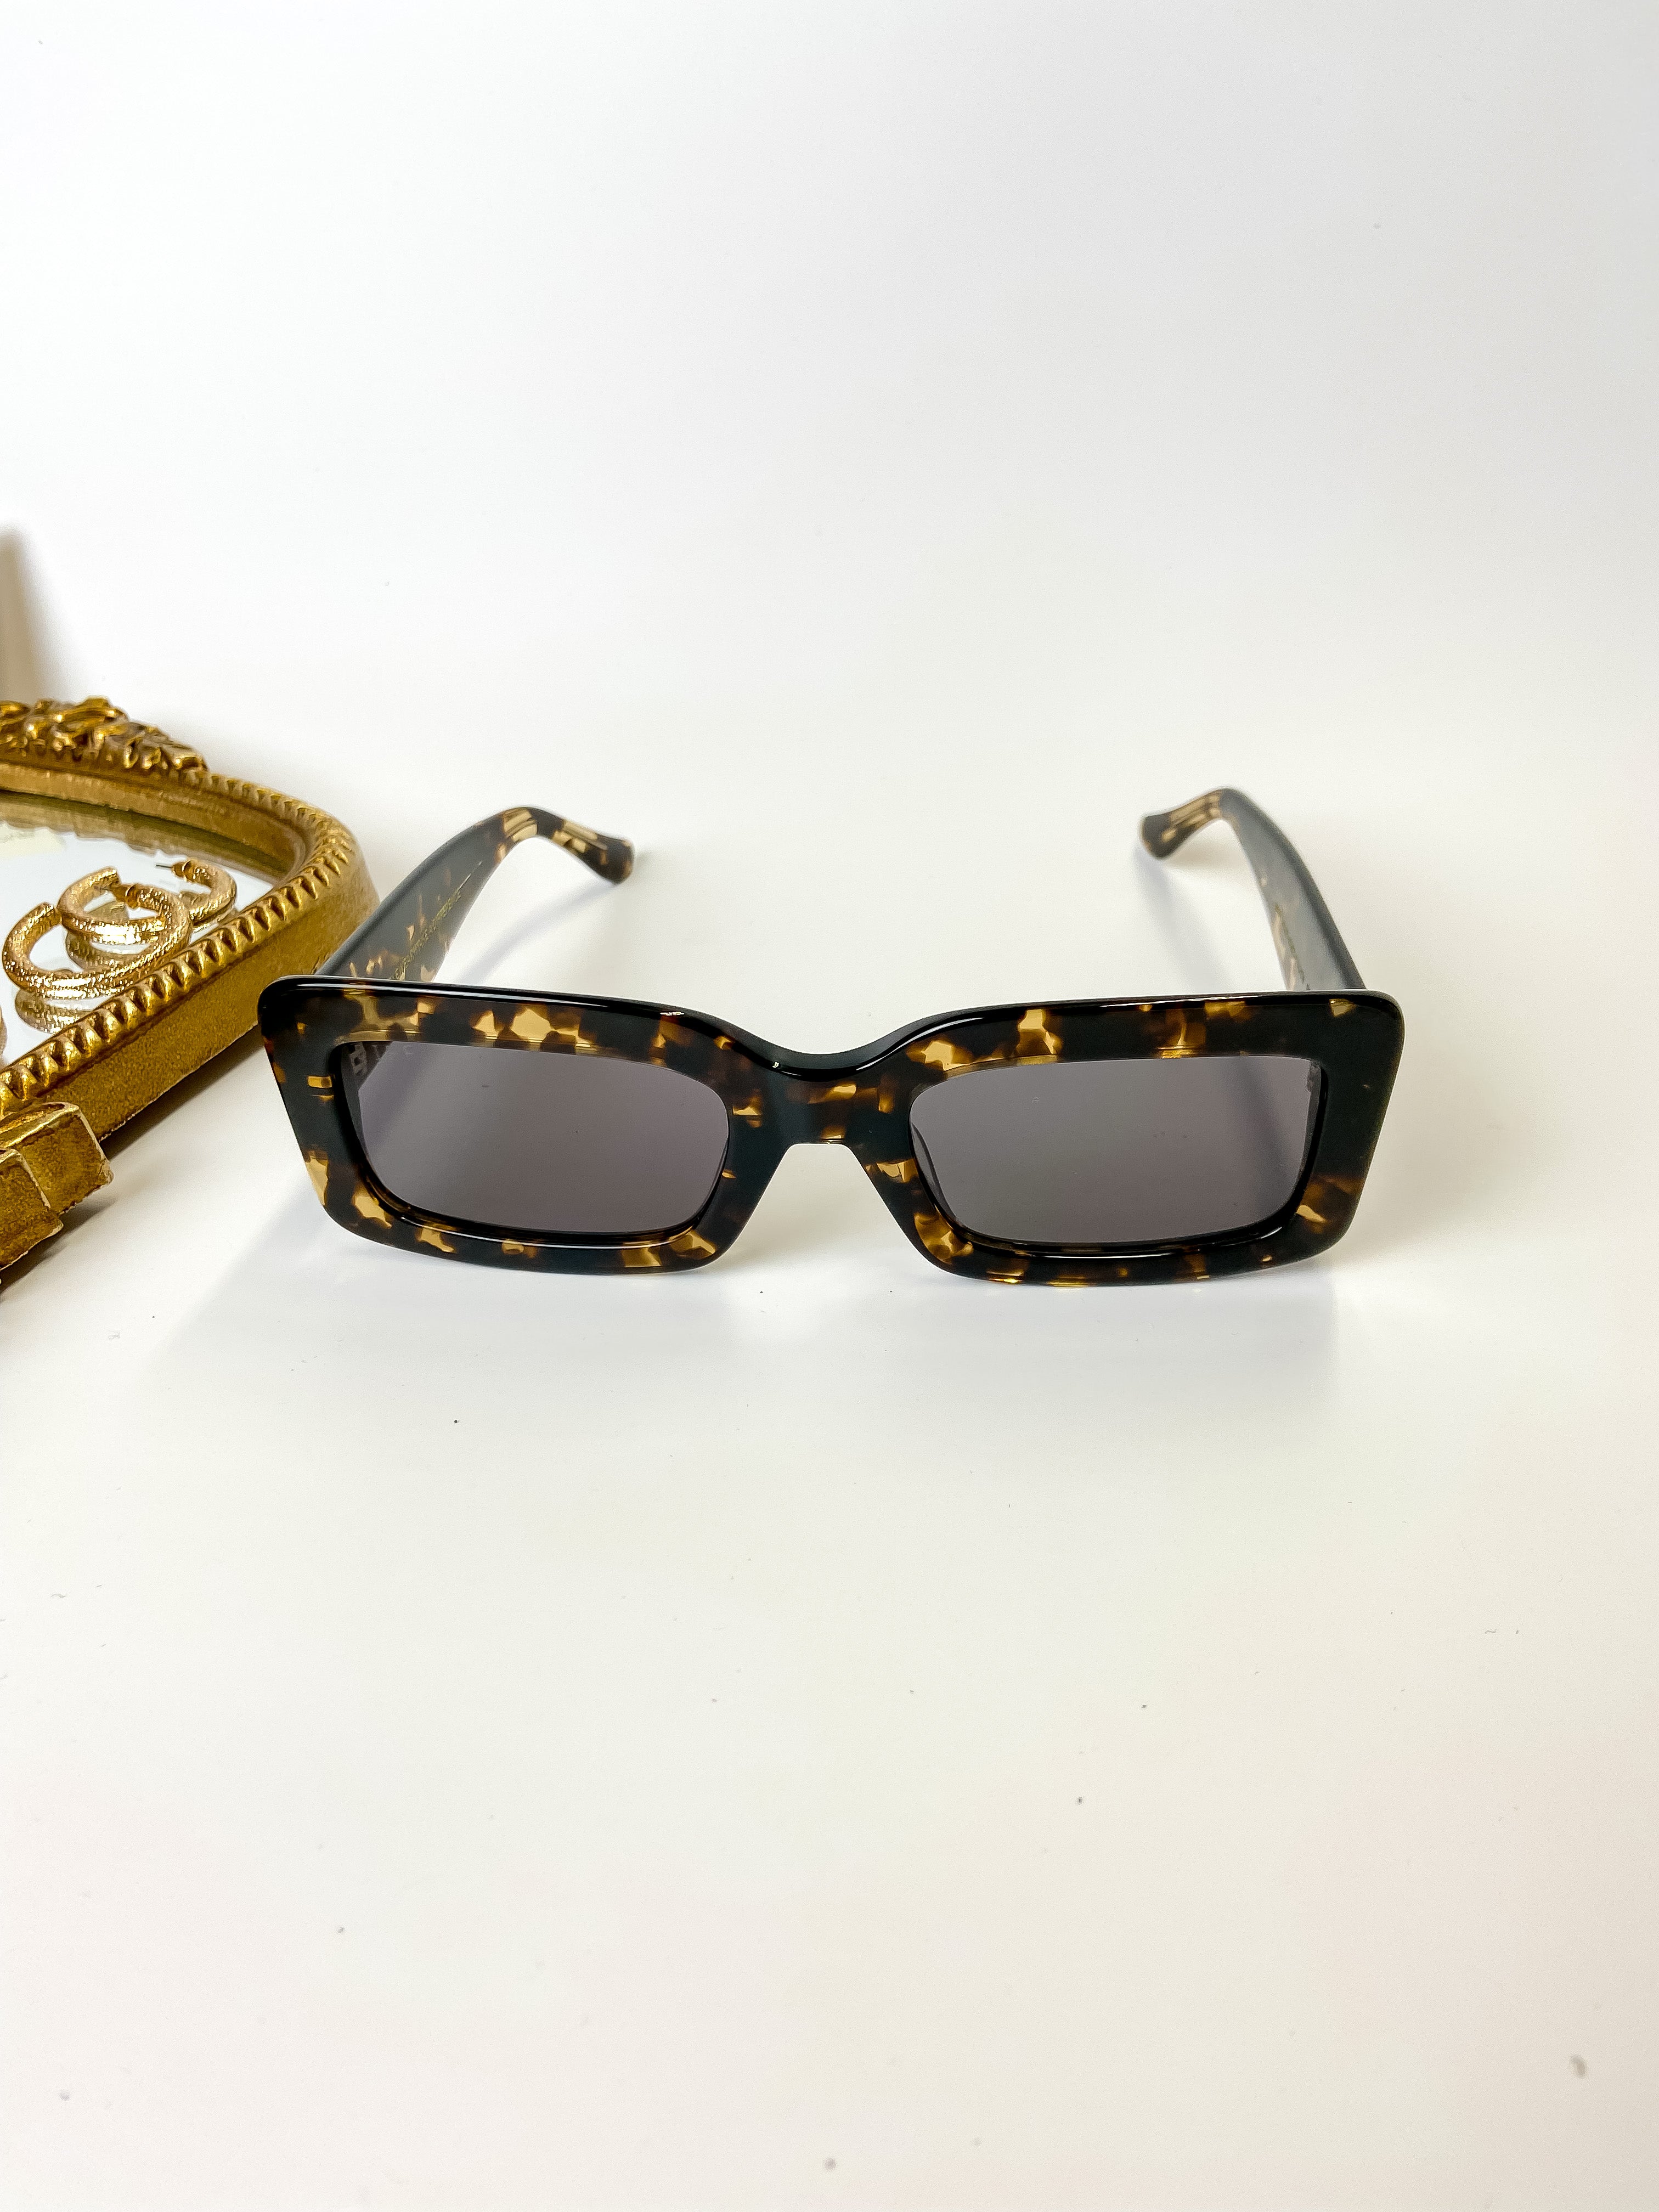 DIFF | Indy Grey Rectangle Lens Sunglasses in Espresso Tortoise - Giddy Up Glamour Boutique